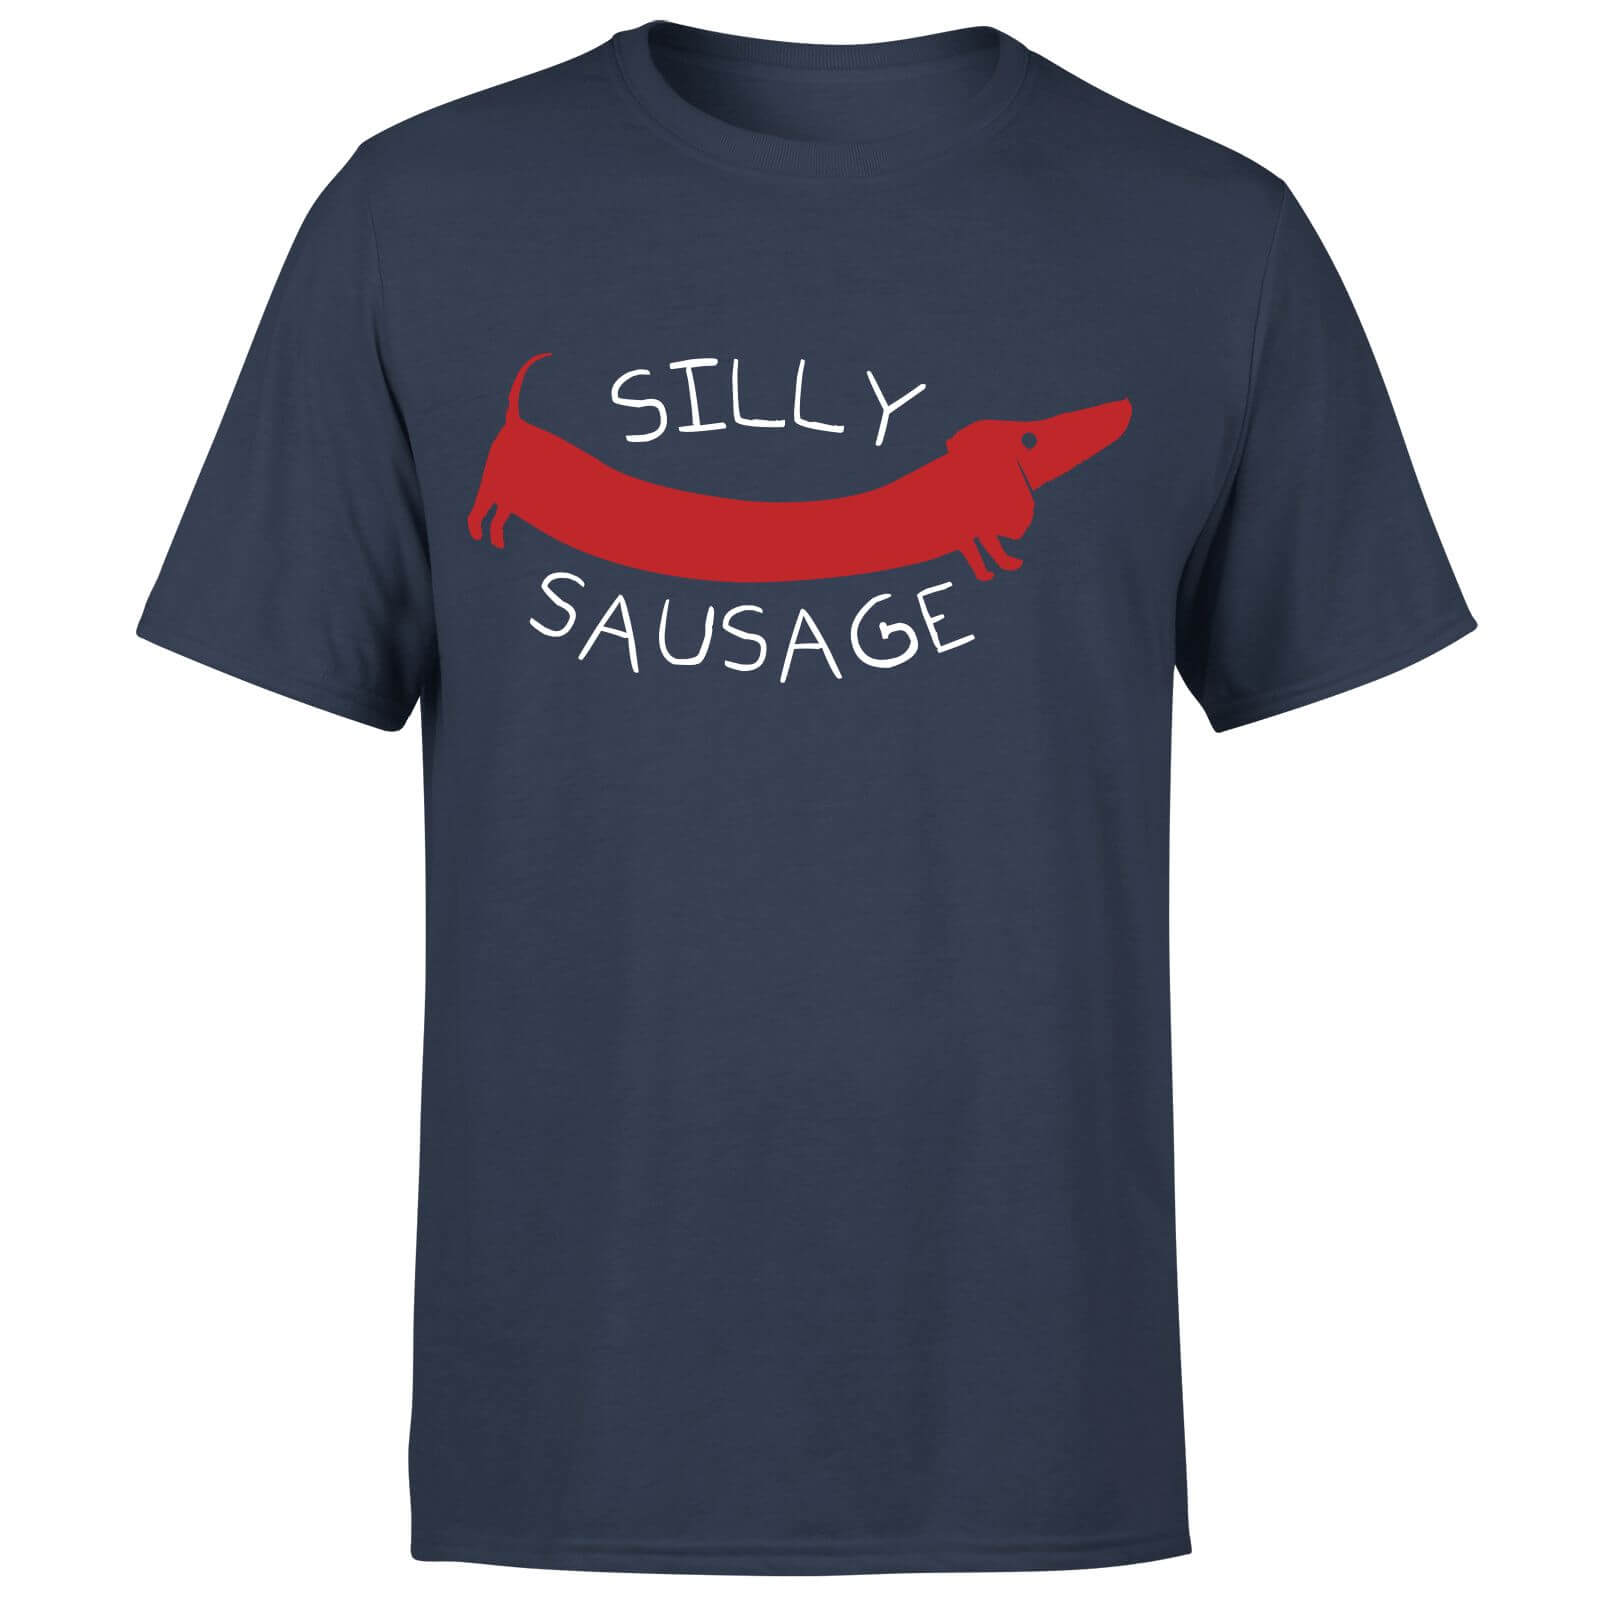 Silly Sausage T-Shirt - Navy - S - Navy